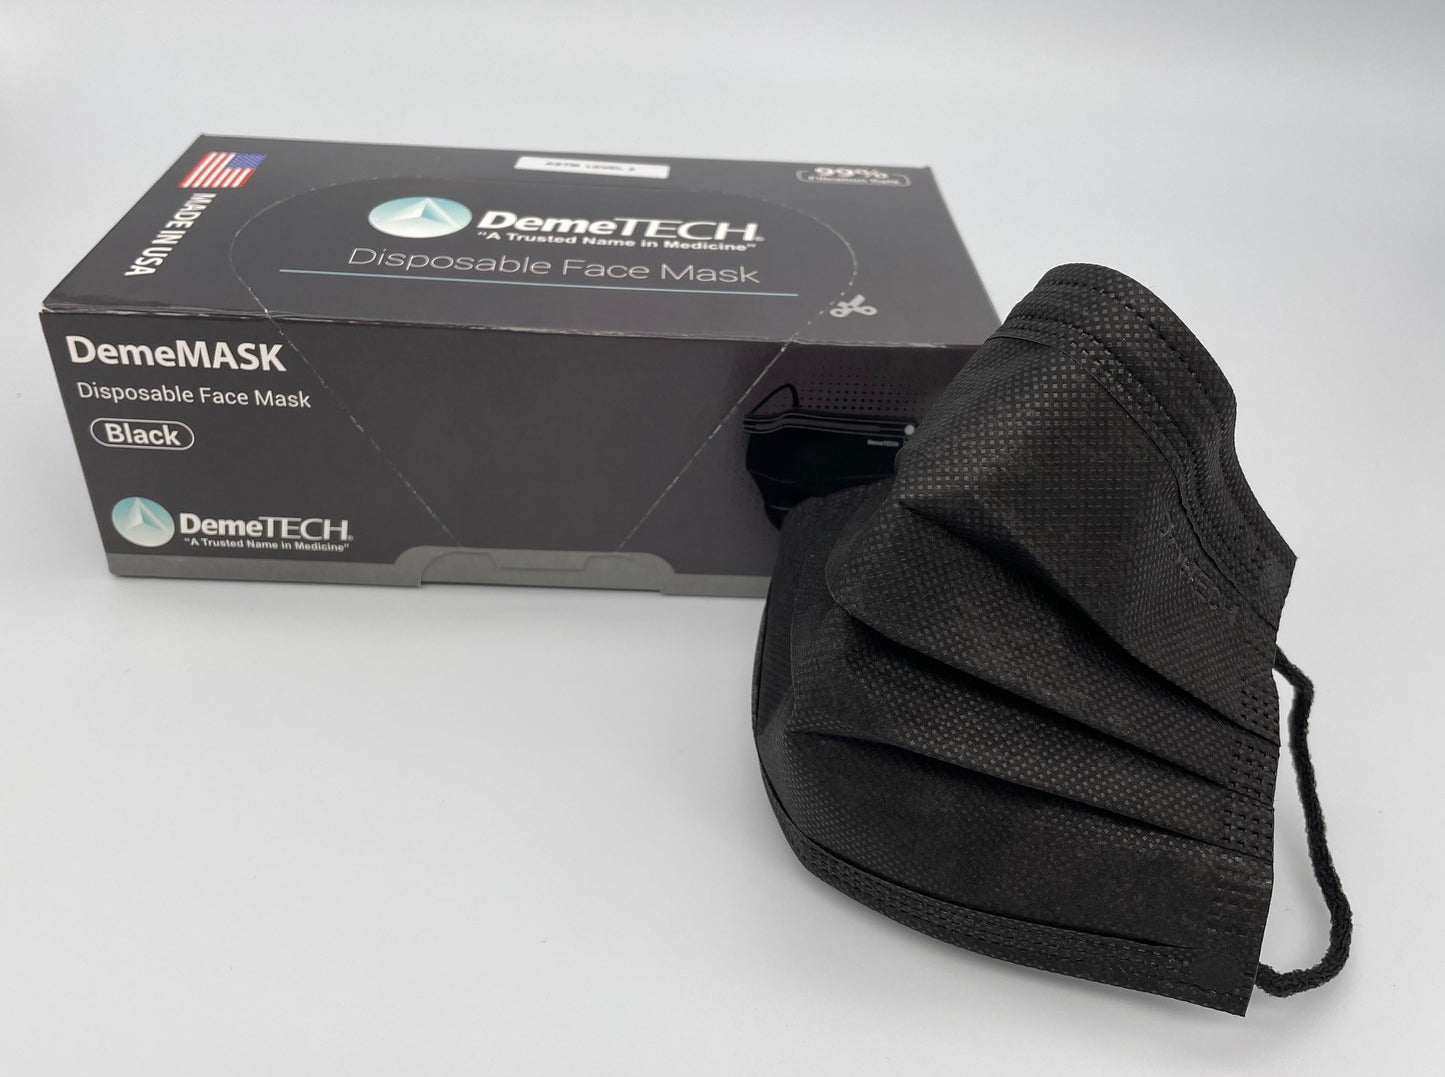 DemeMask-Black 3ply ASTM Level 3 Mask-MADE IN USA-50 per box